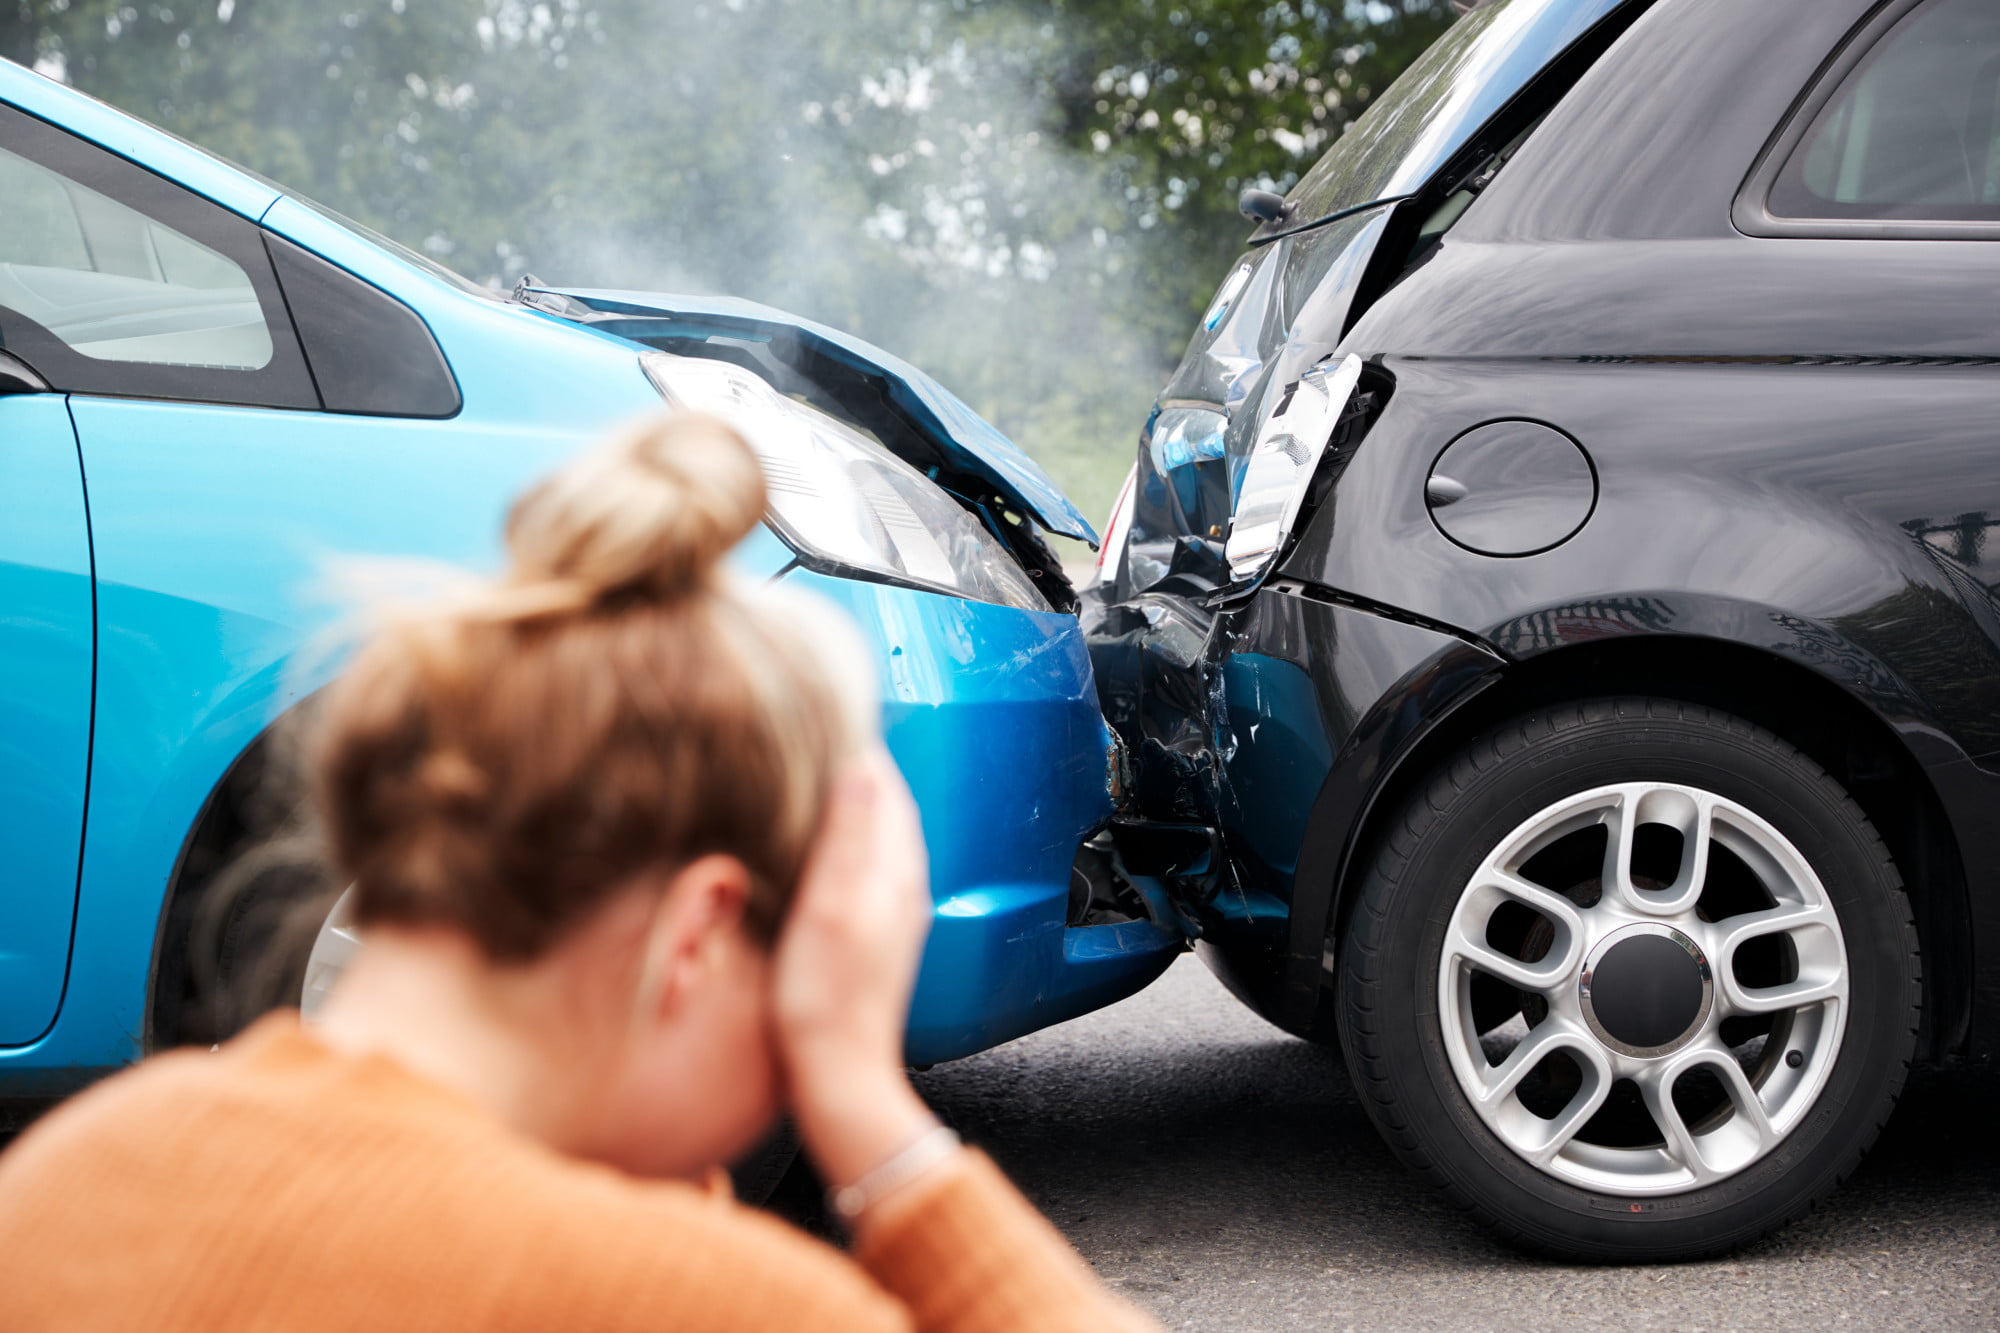 Are you on the fence about whether or not you should hire a car accident lawyer? Here are just a few major benefits of seeking legal help.